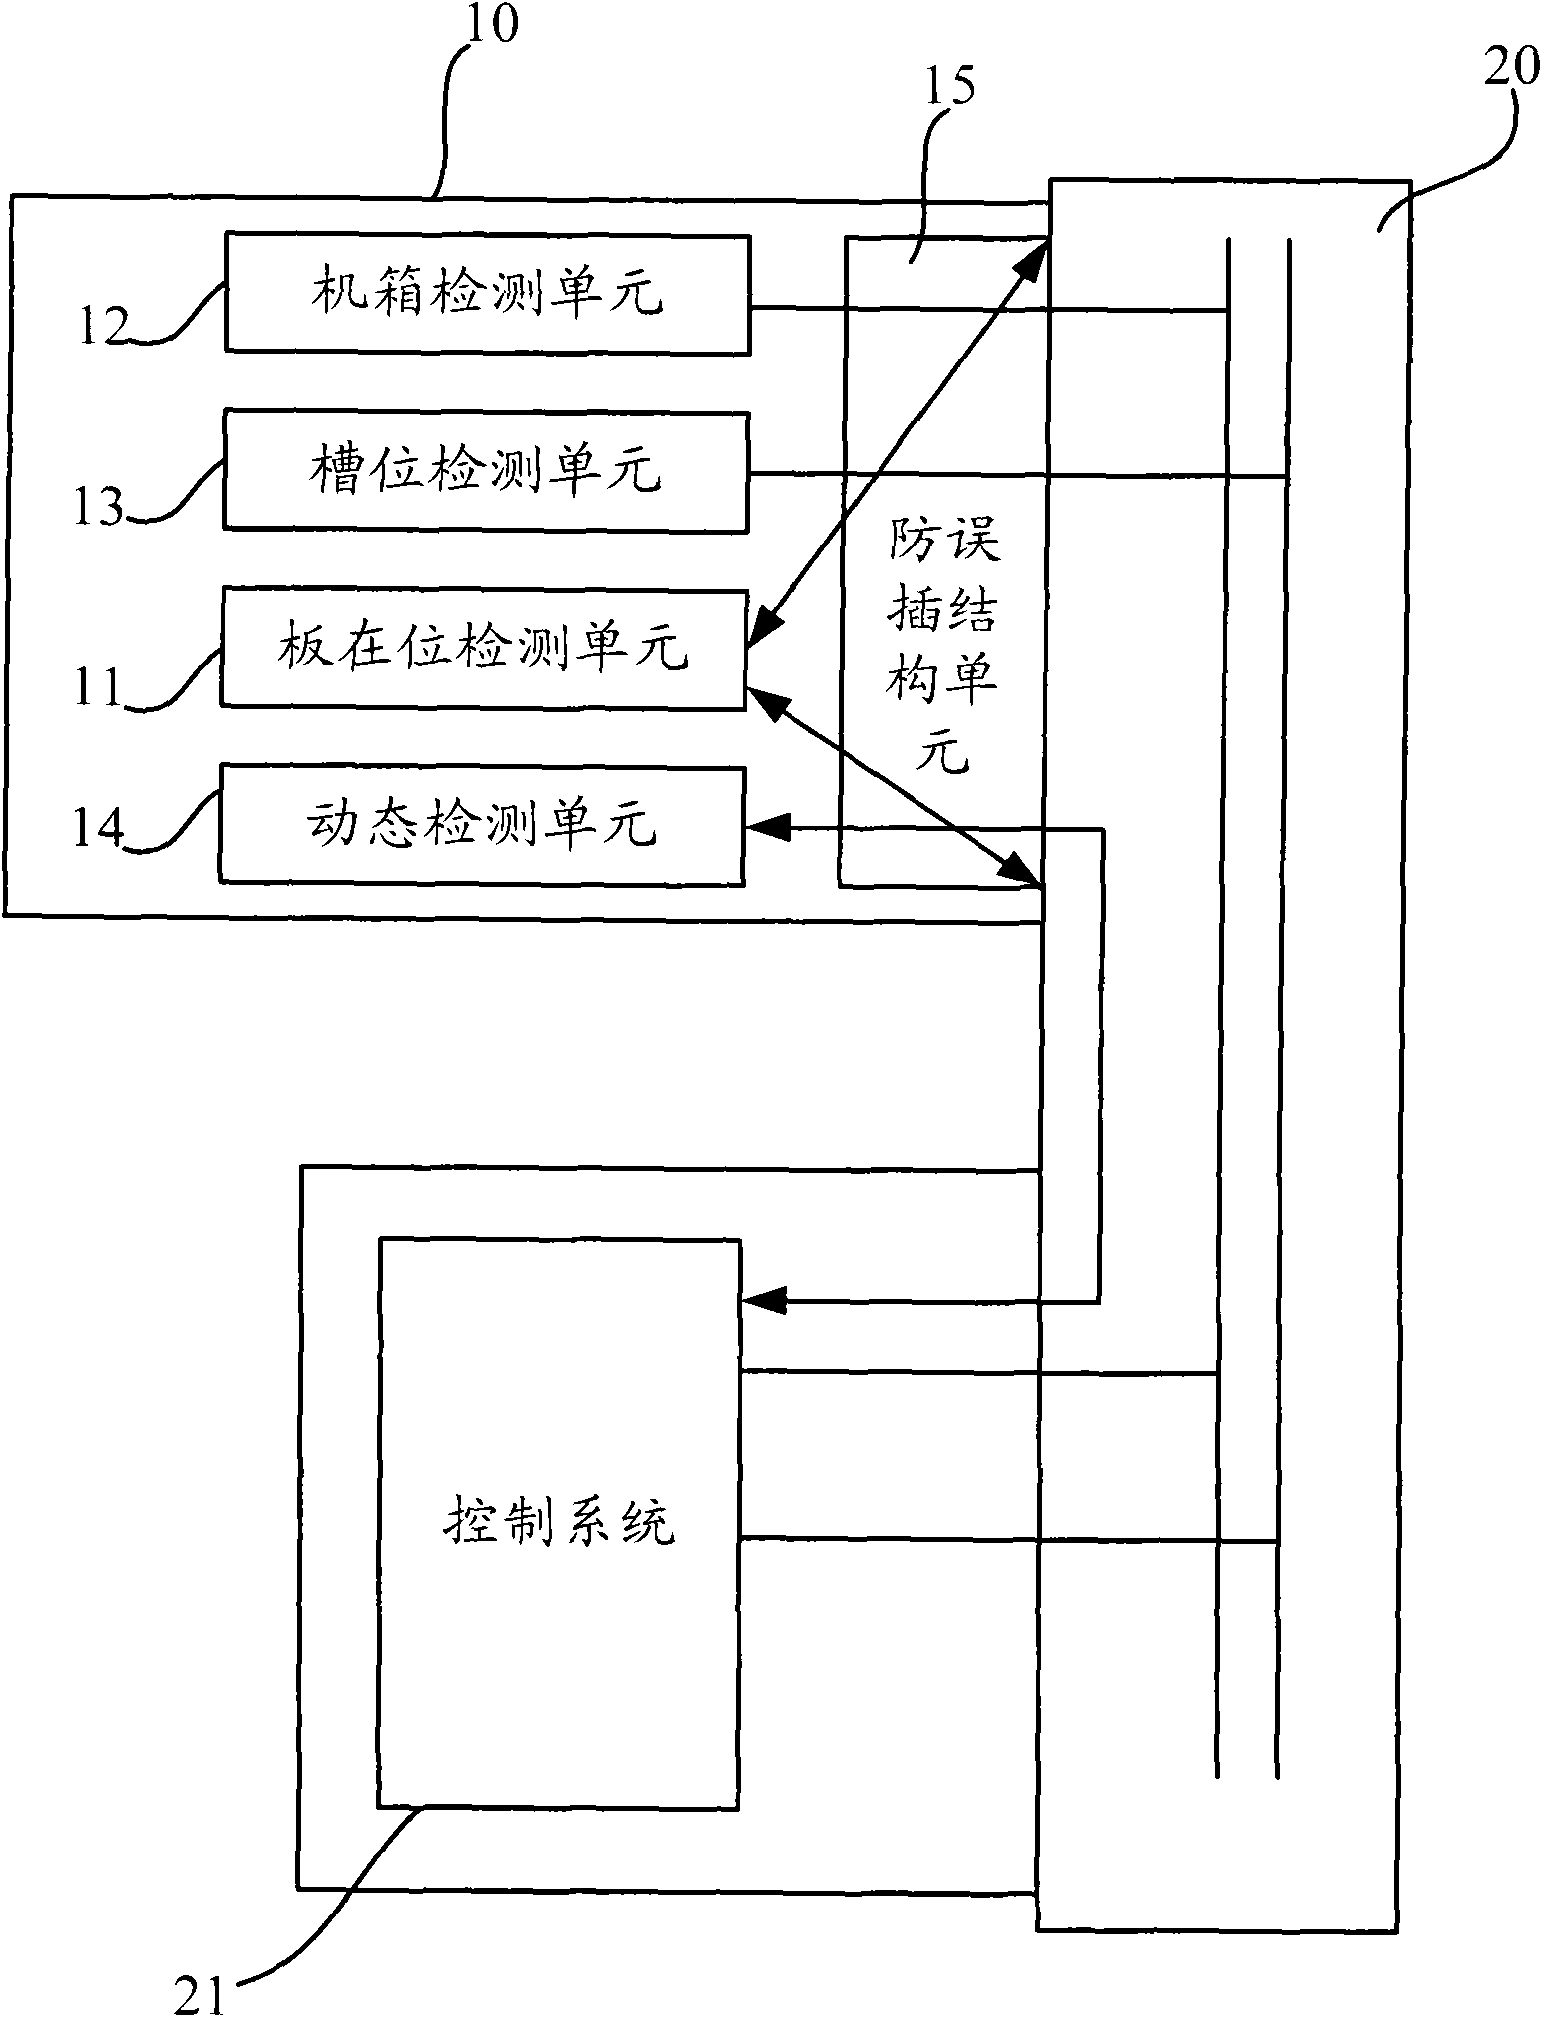 Interface system ensuring connection reliability between sub-card and backing plate, backing plate and method